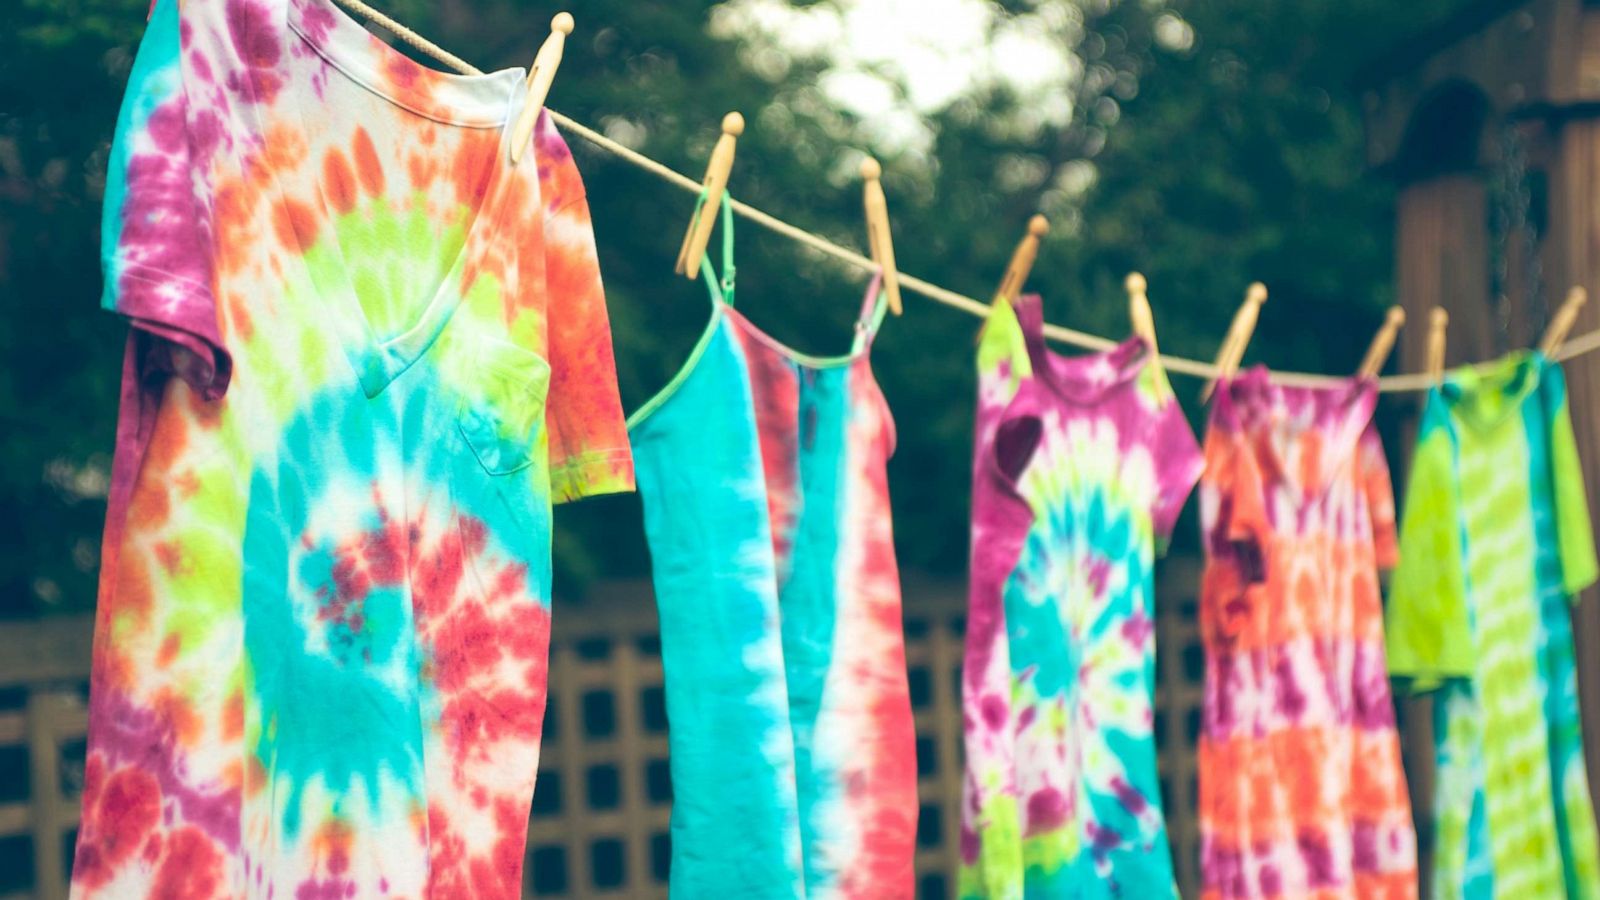 DIY Tie-Dye Shirts - How To Make Your Own - My Humble Home and Garden